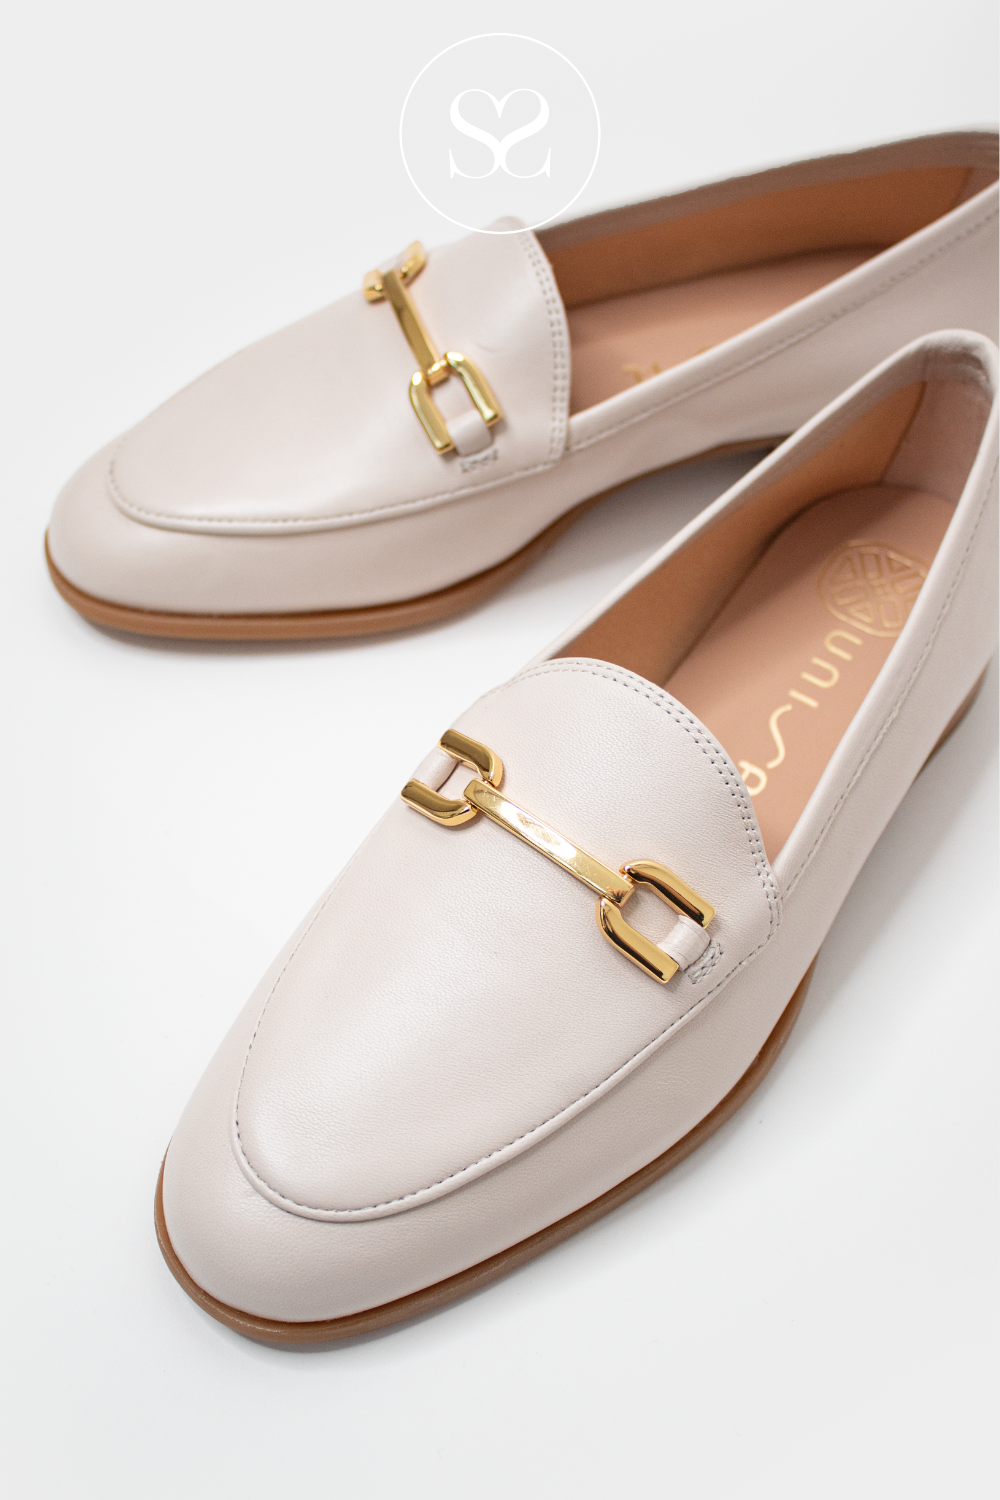 UNISA DALCY IVORY LEATHER FLAT SLIP ON LOAFERS WITH GOLD BUCKLE